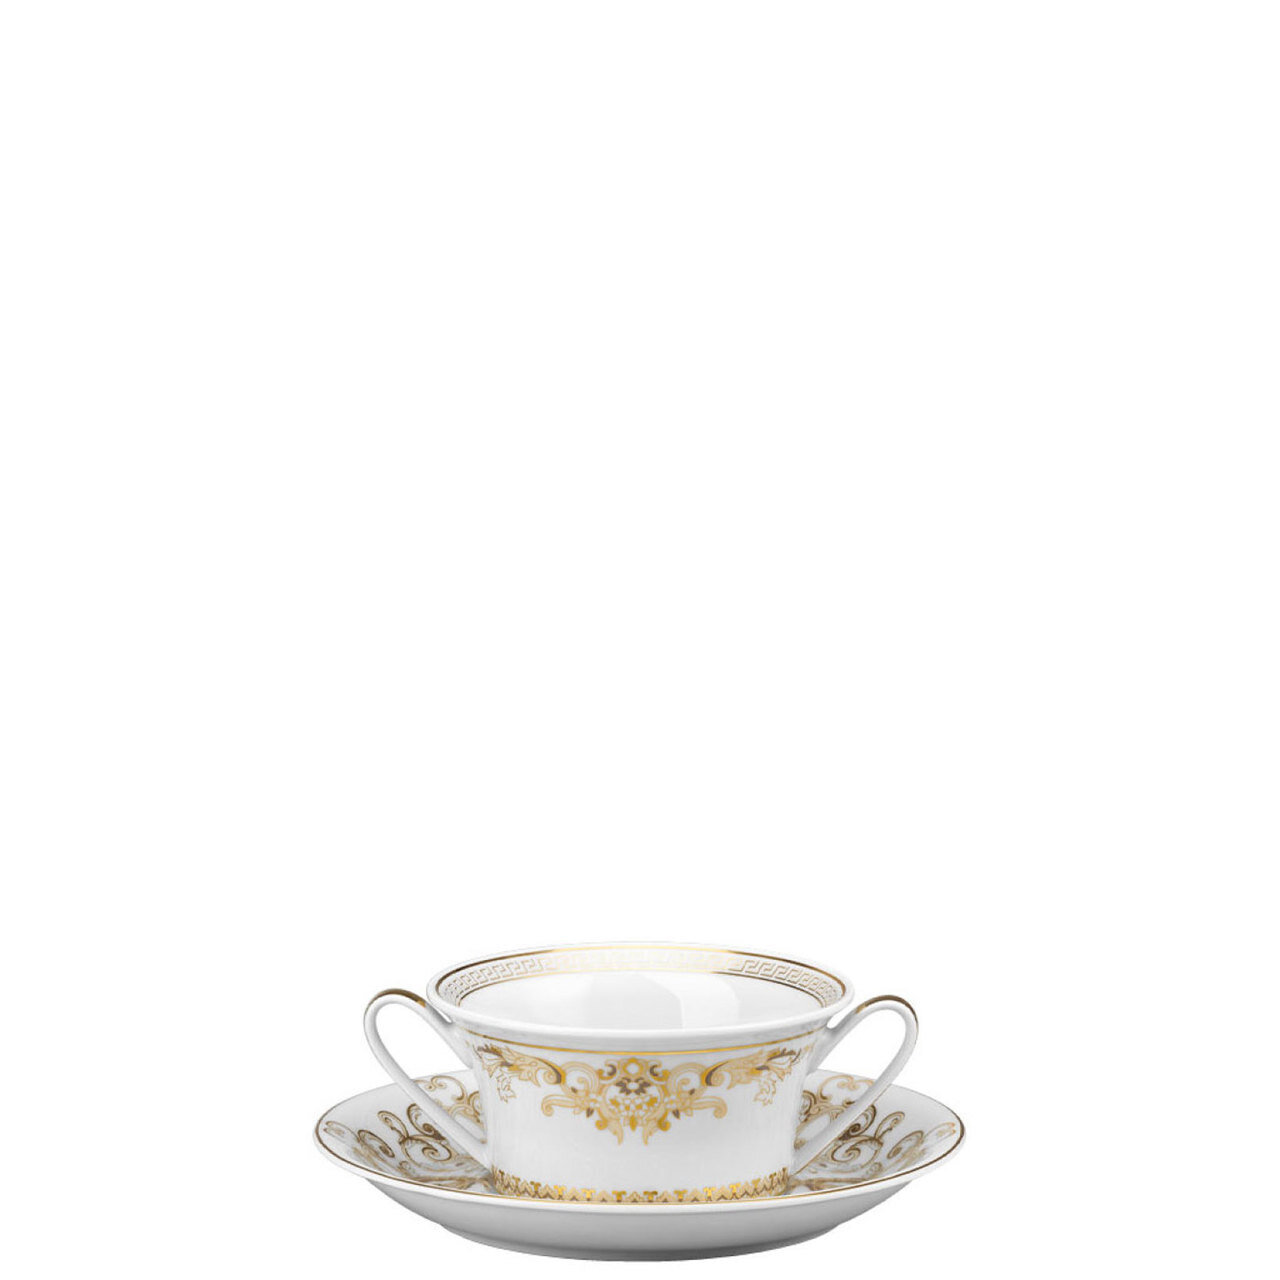 Versace Medusa Gala Cream Soup Cup and Saucer 6 3/4 Inch 10 oz.